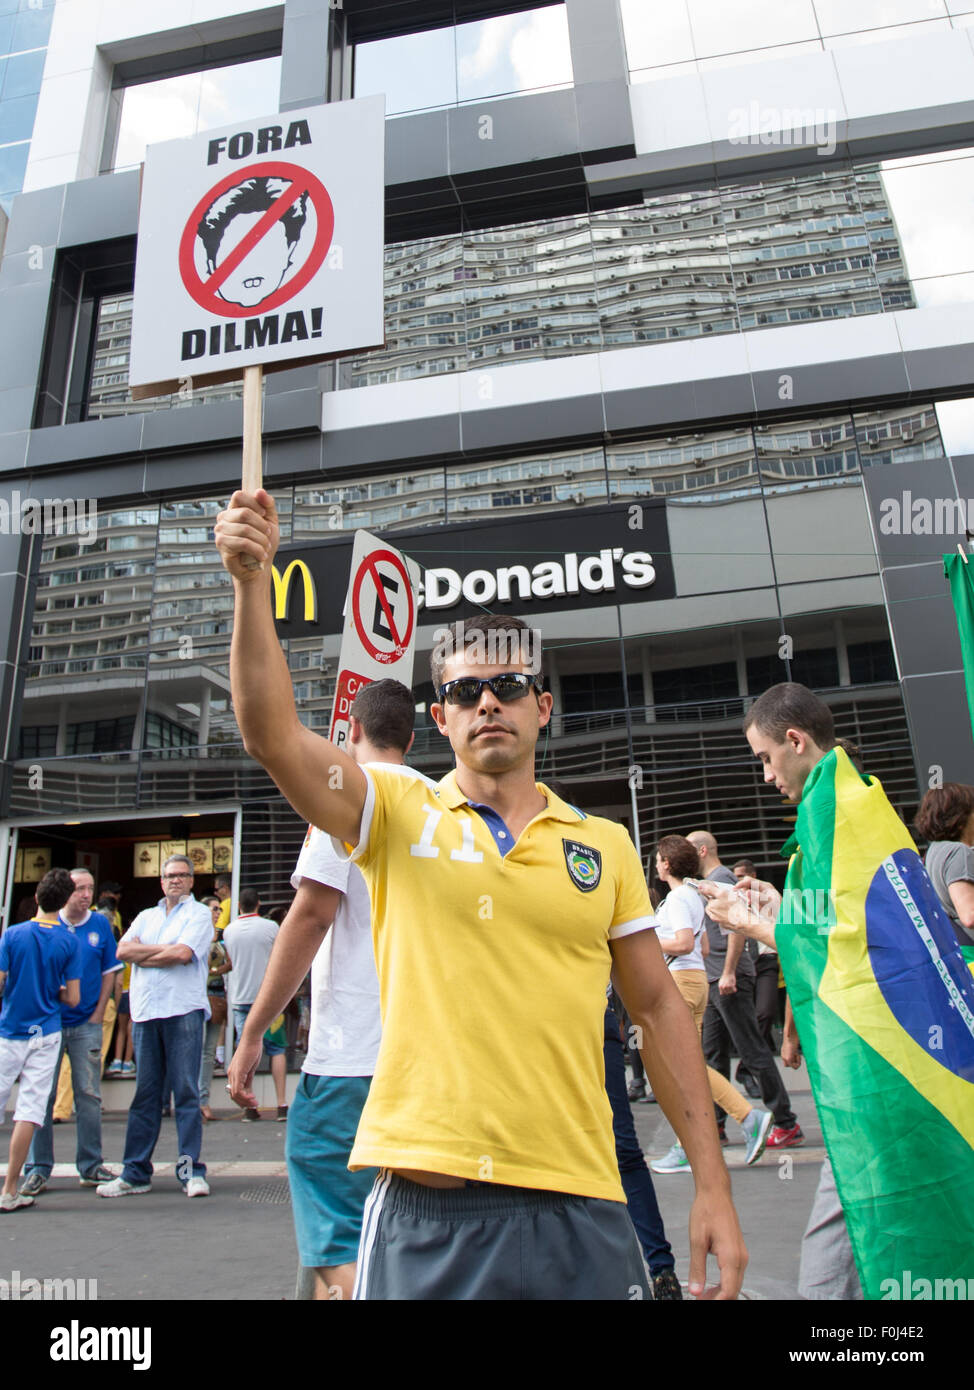 Sao Paulo, Brazil. 16th Aug, 2015. A protester holds a cardboard with the slogan 'Dilma out' during an anti-government demonstration in Sao Paulo, Brazil, Aug. 16, 2015. A demonstration took place on the Paulista Avenue in downtown Sao Paulo on Sunday with thousands of protesters marching with slogans on flags and cardboards. Support for Brazilian President Dilma Rousseff has fallen to eight percent in a recent poll as she was accused of failing to curb corruption and the slump of economy. Credit:  Xu Zijian/Xinhua/Alamy Live News Stock Photo